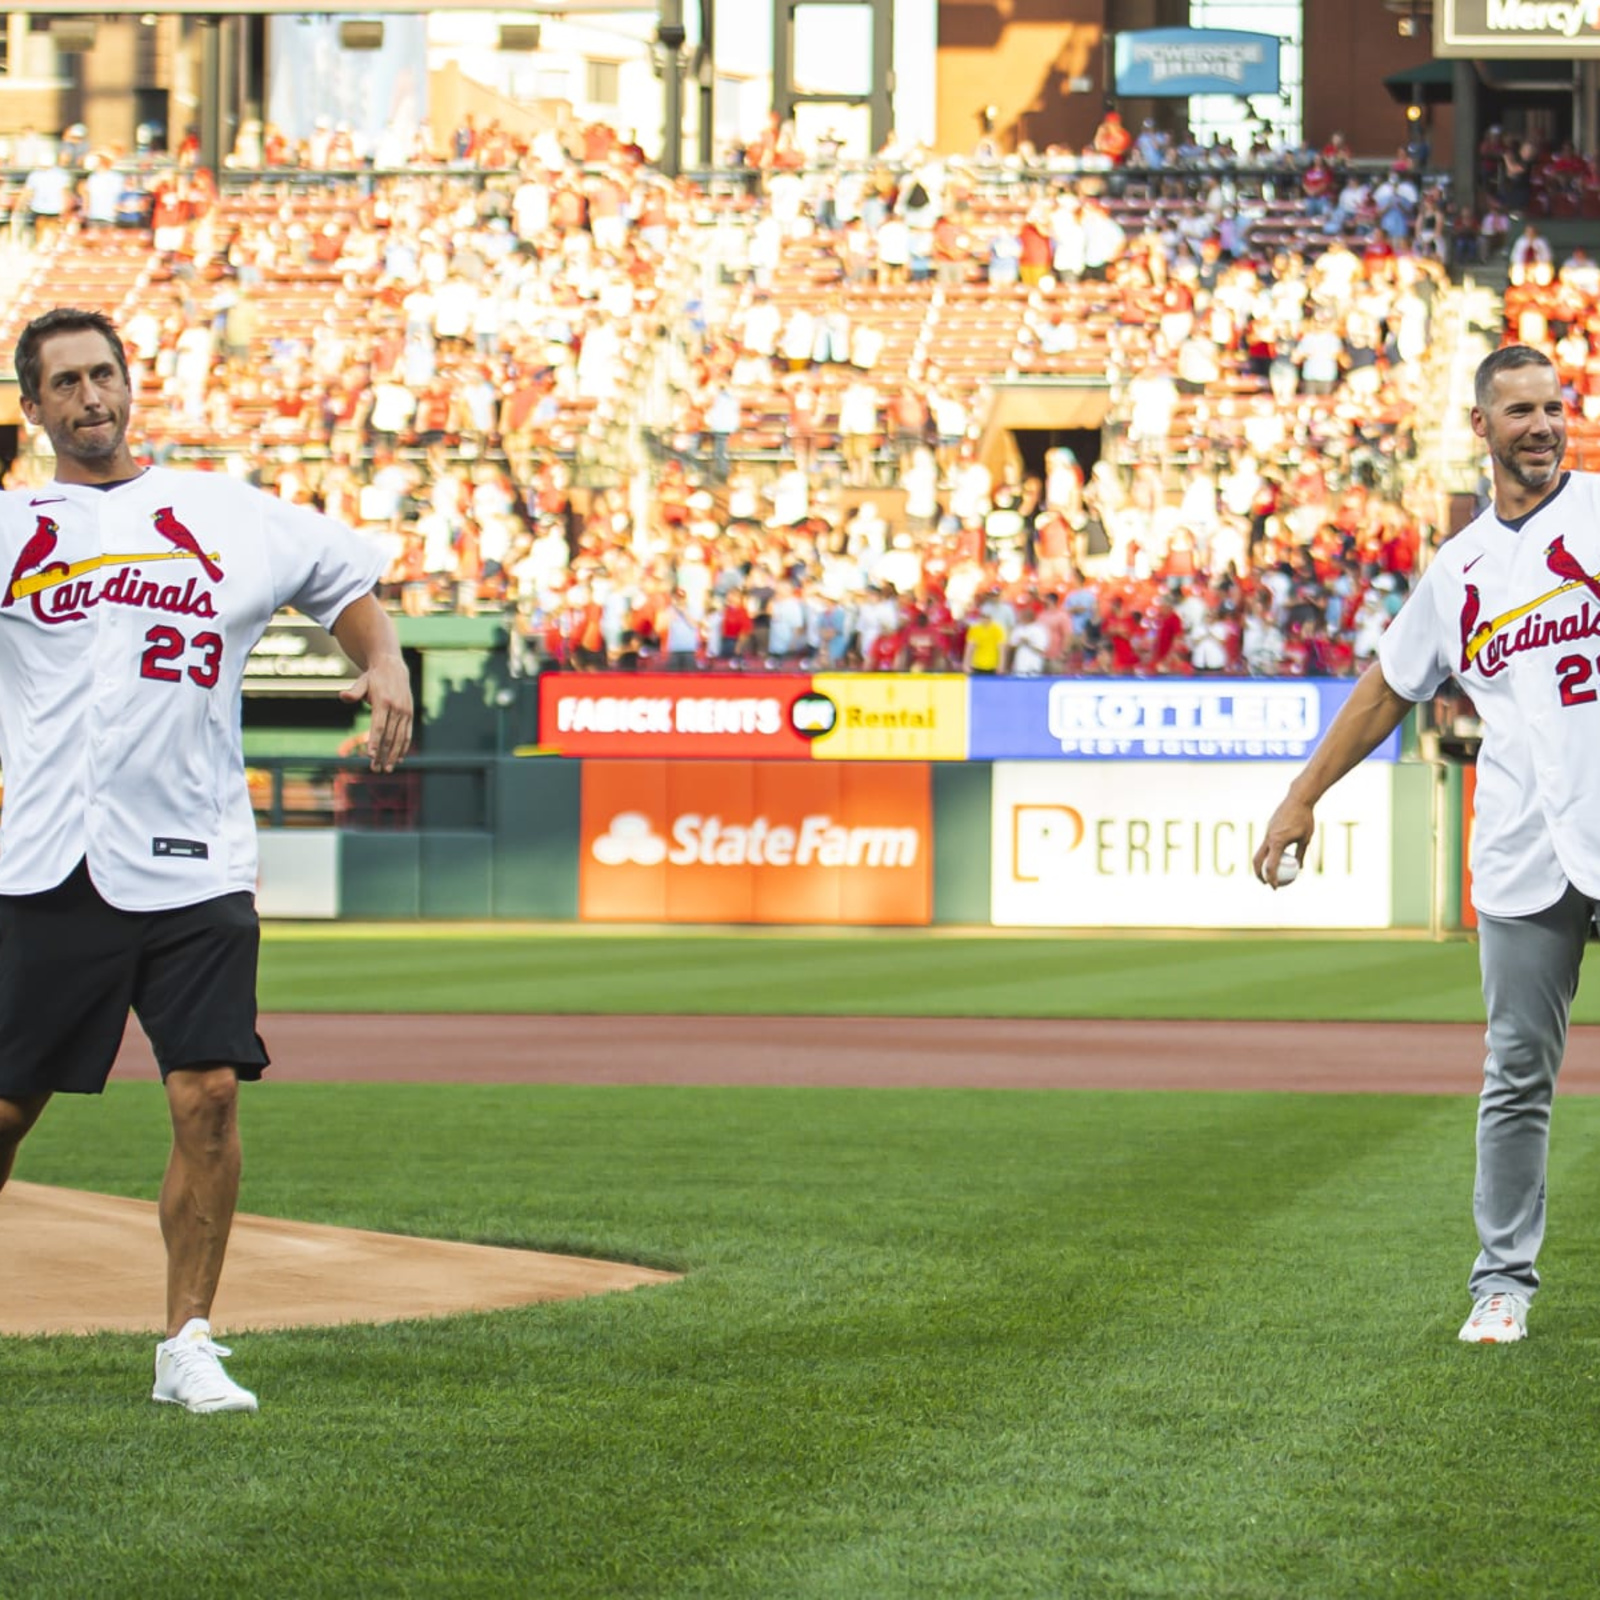 Who will be next St. Louis Cardinals player elected to Hall of Fame?